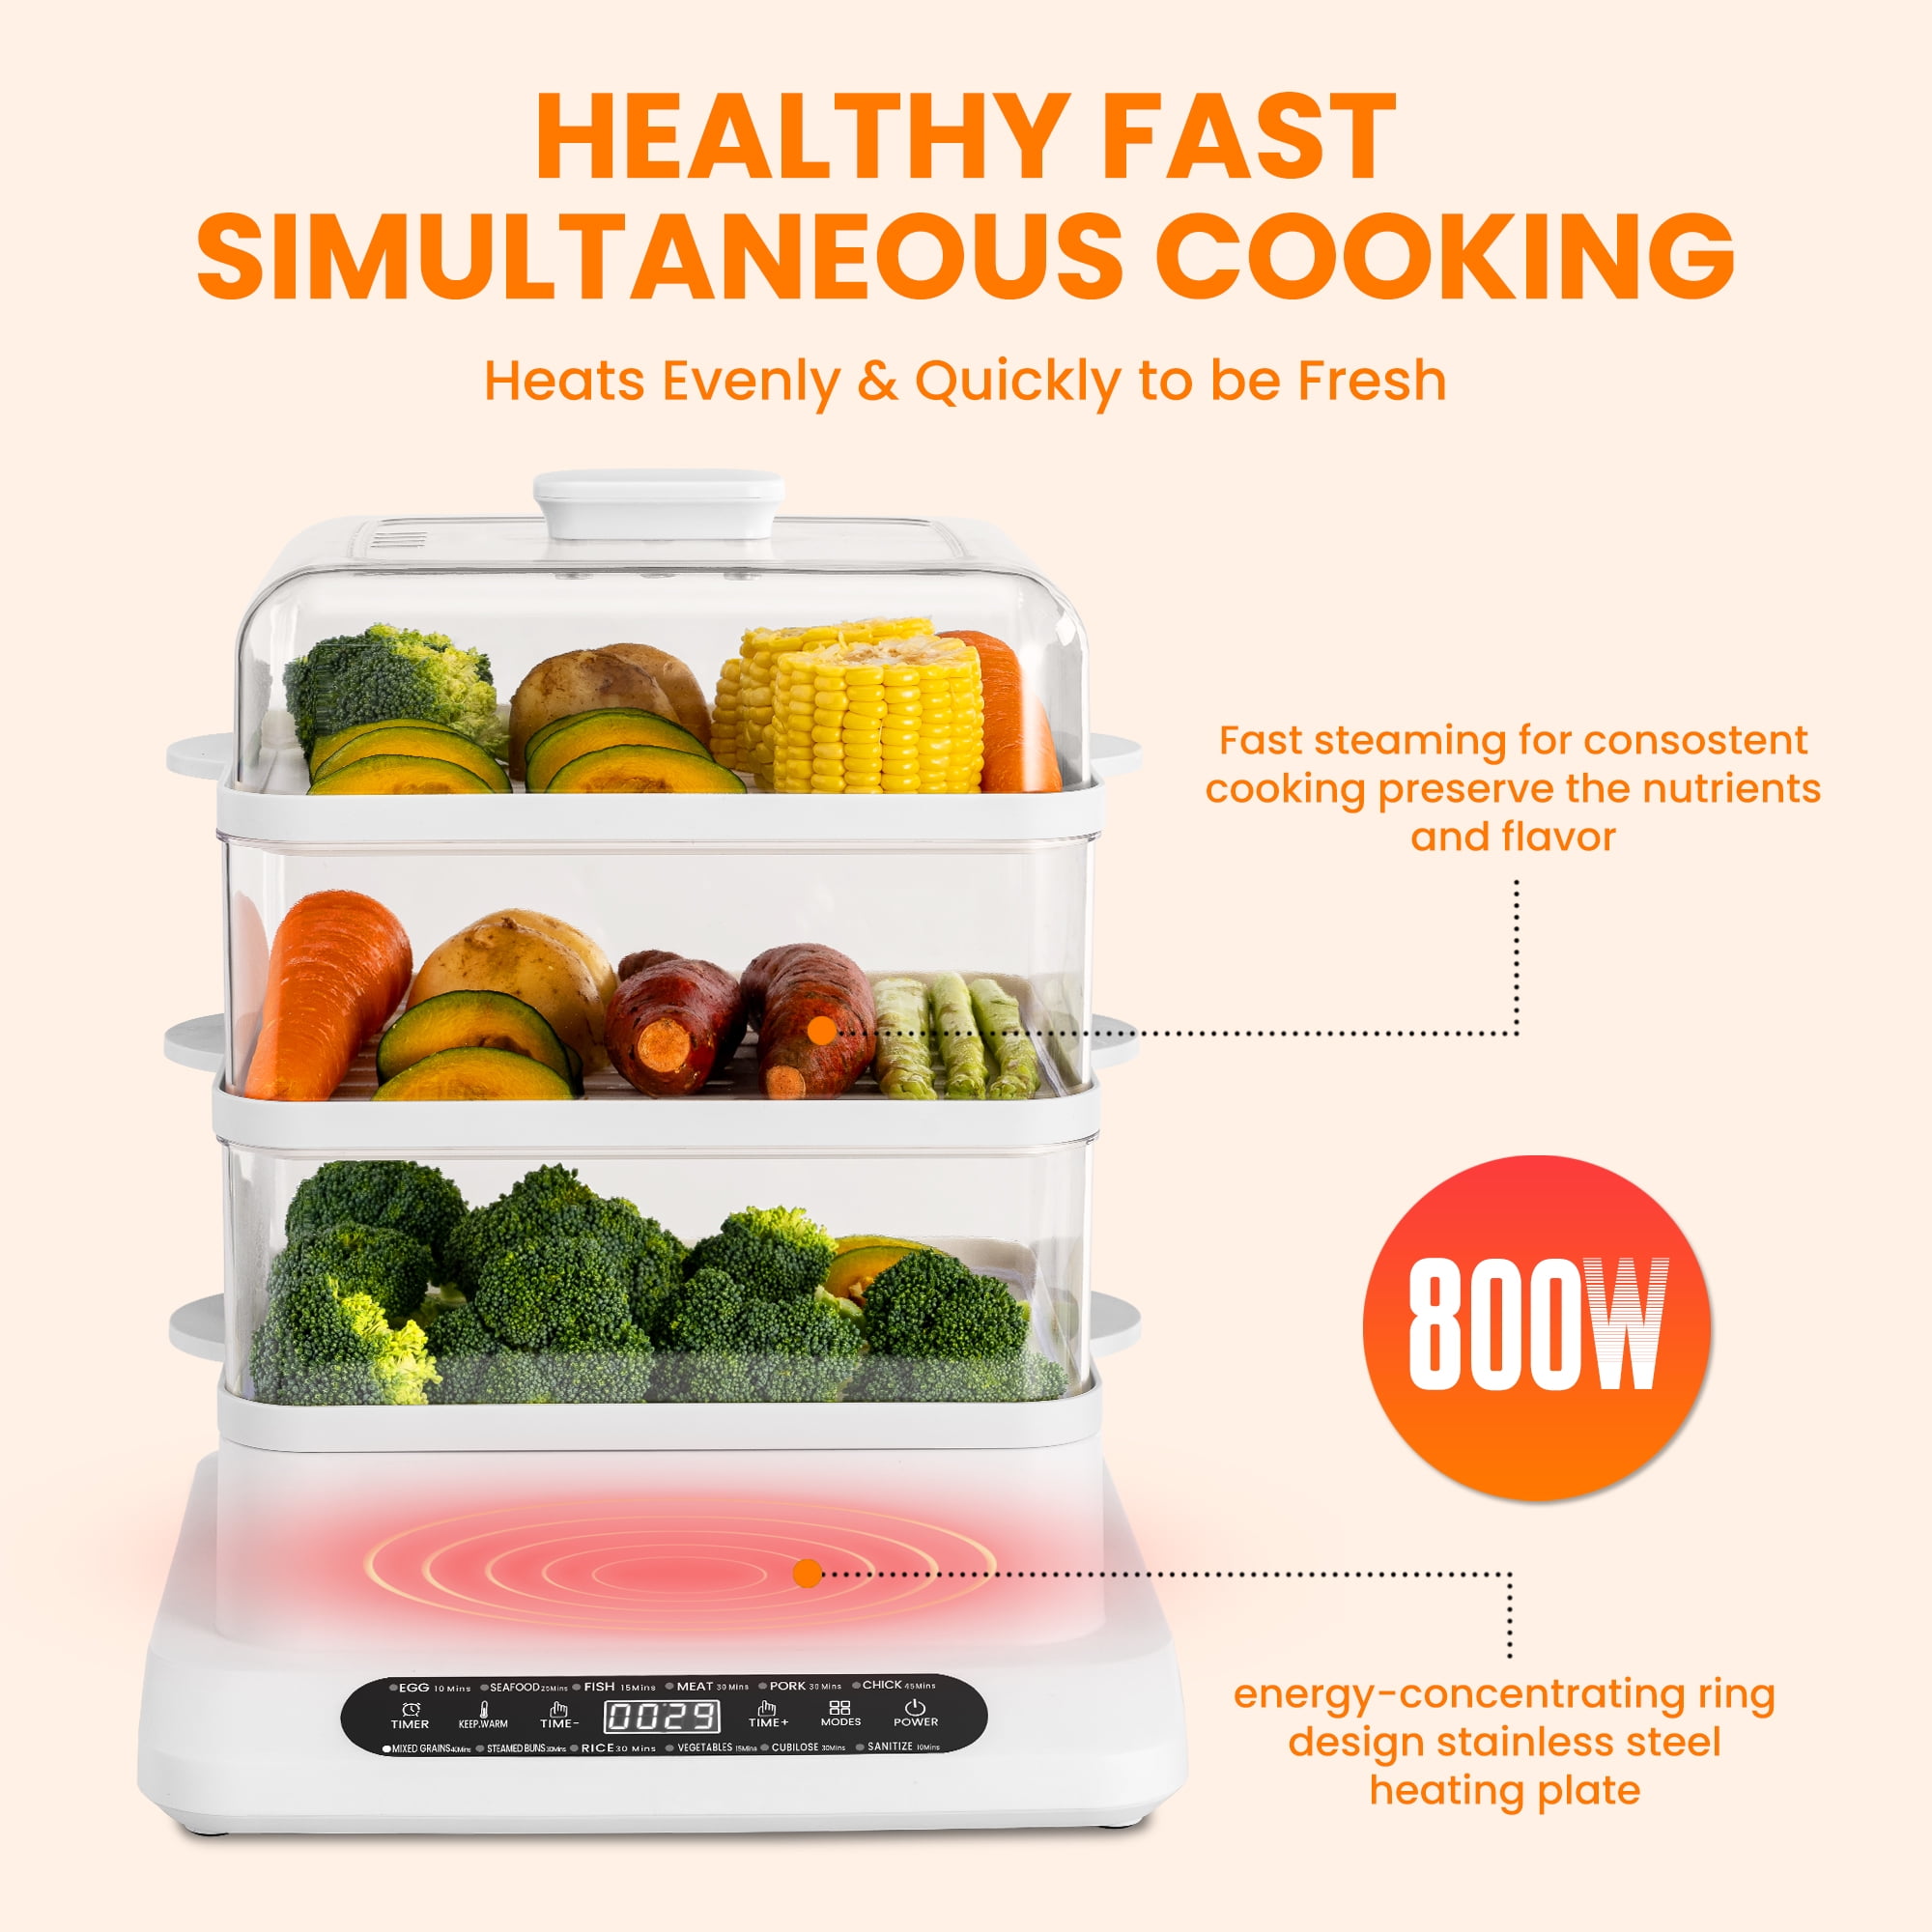 Why Buy an Electric Vegetable Steamer for your Food? - HubPages